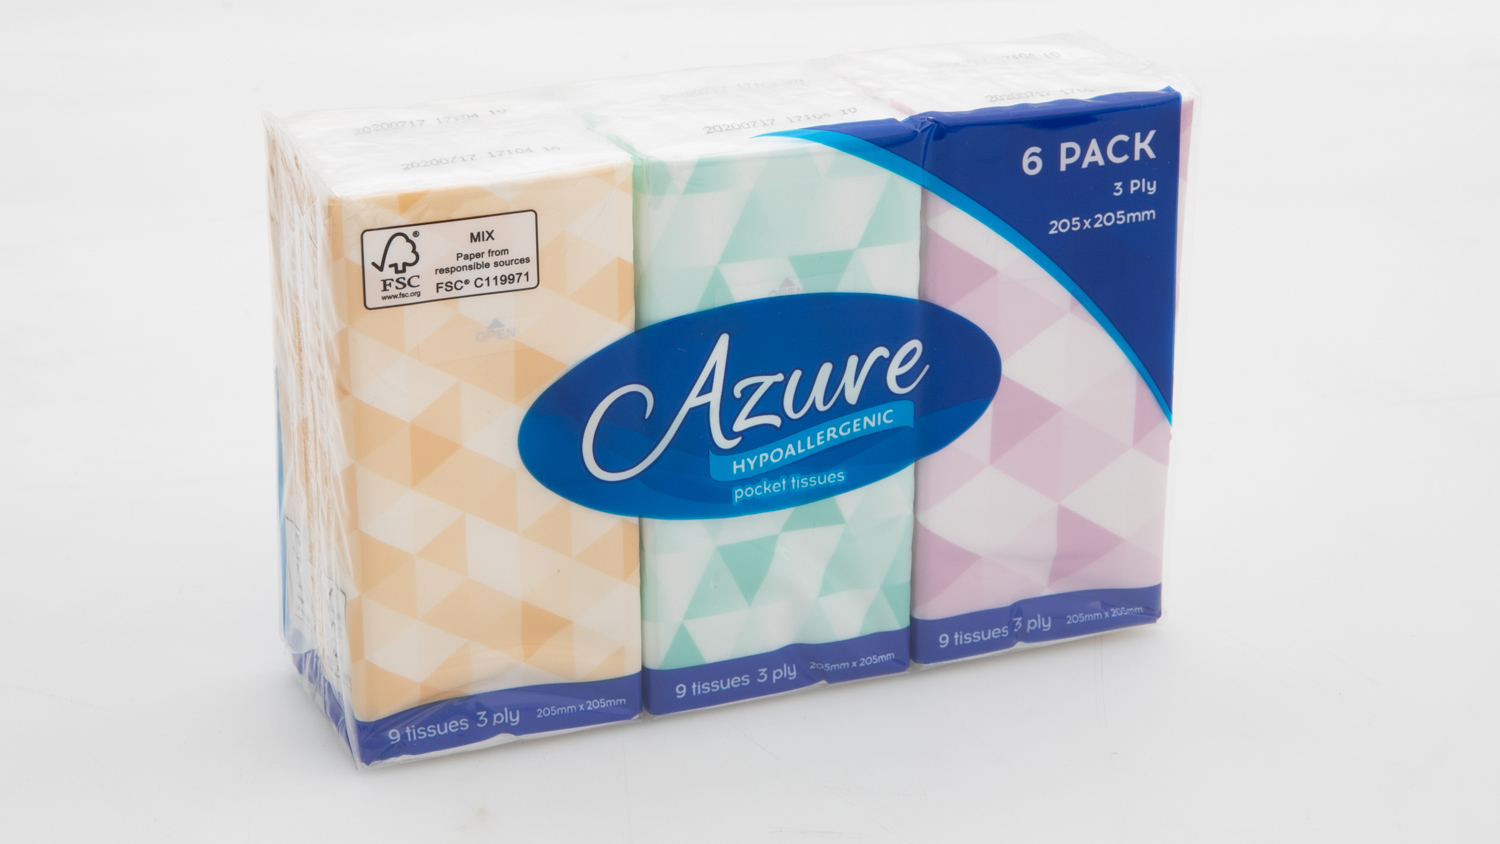 Woolworths Azure Hypoallergenic Pocket Tissues 6 pack carousel image